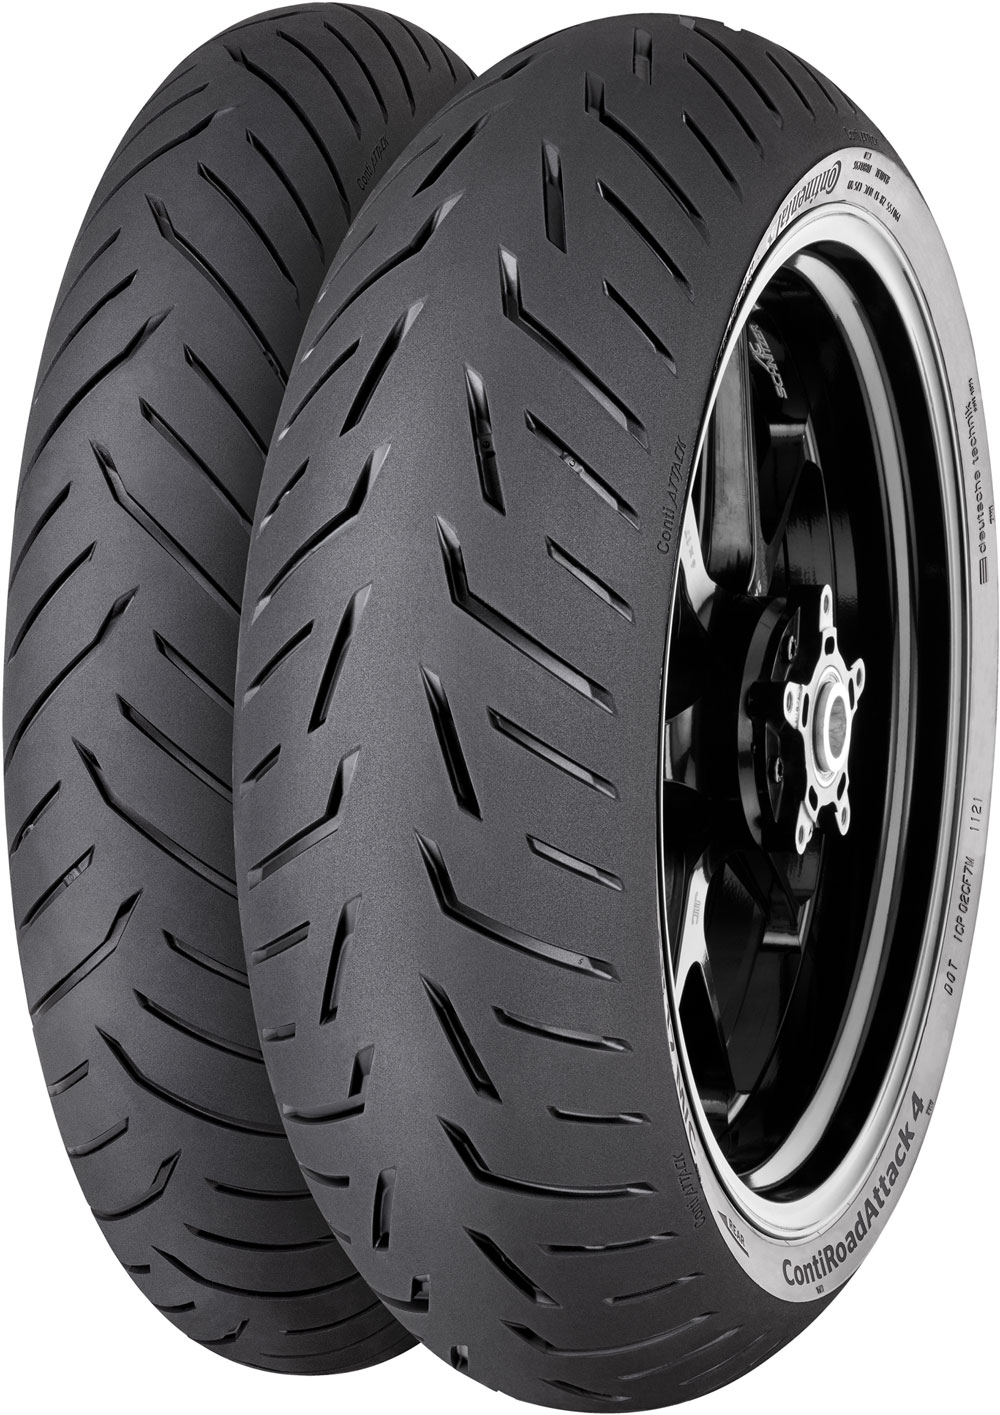 product_type-moto_tires CONTINENTAL RDATTACK4 120/70 R17 58W